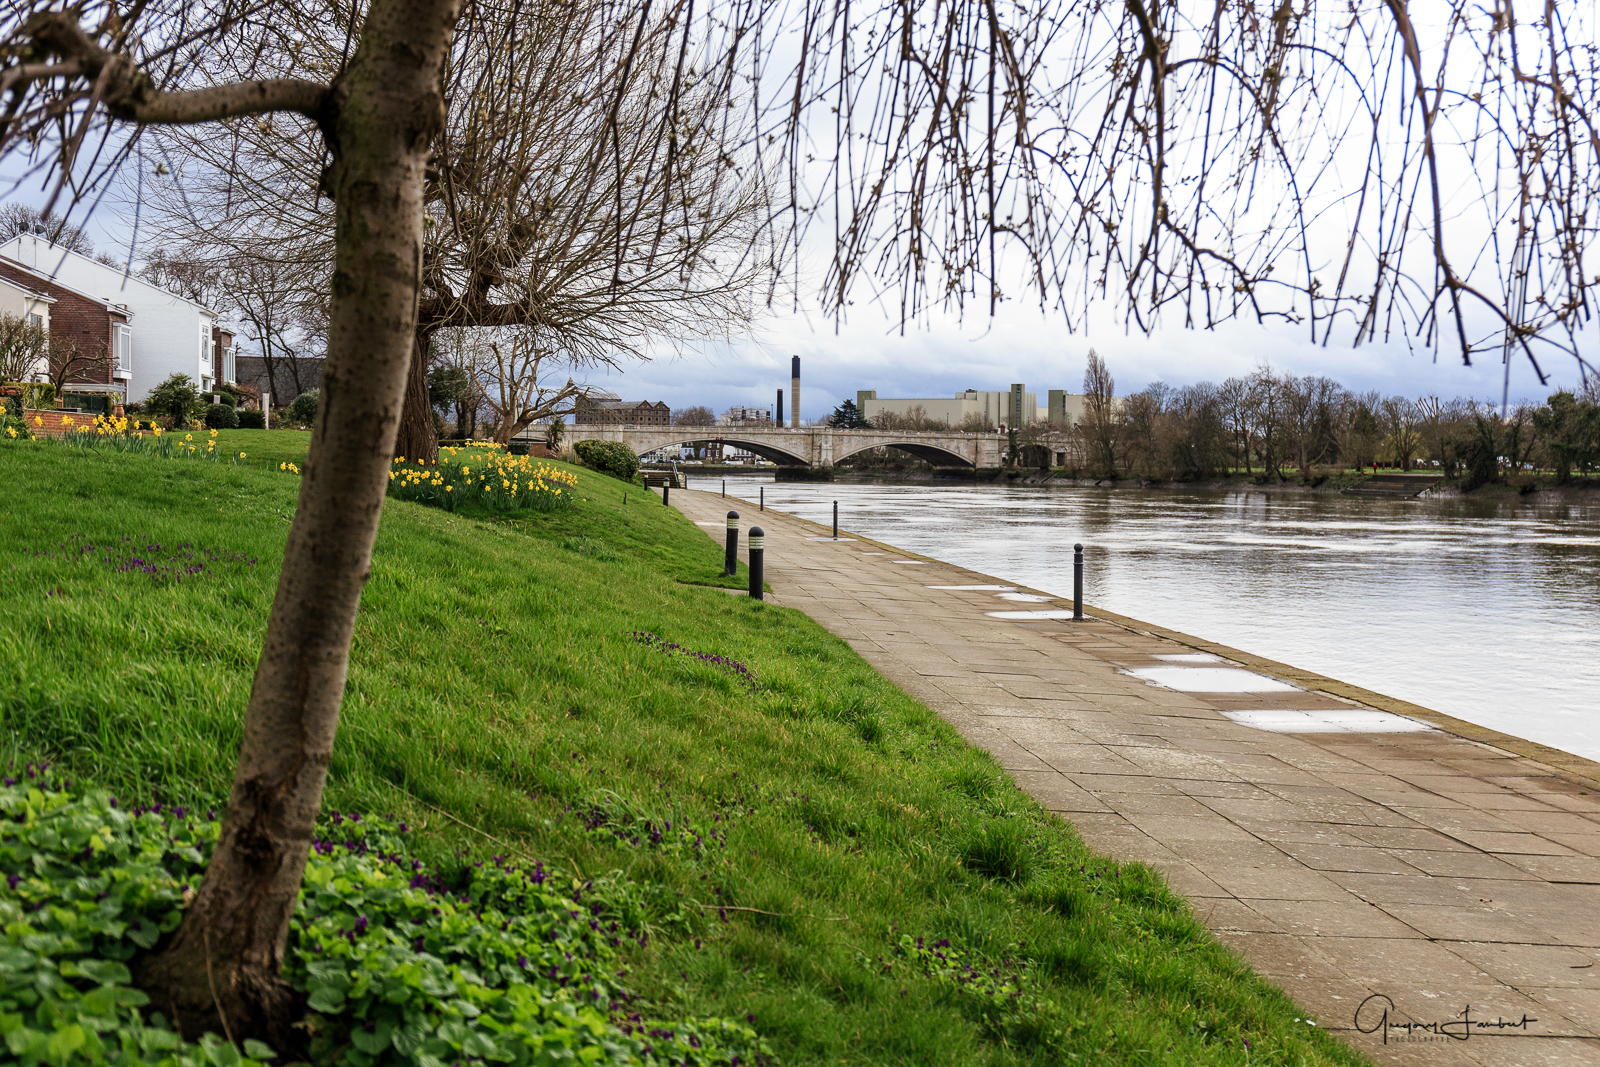 20170308_Hounslow_Chiswick-Bridge_Path-by-the-Thames-looking-back